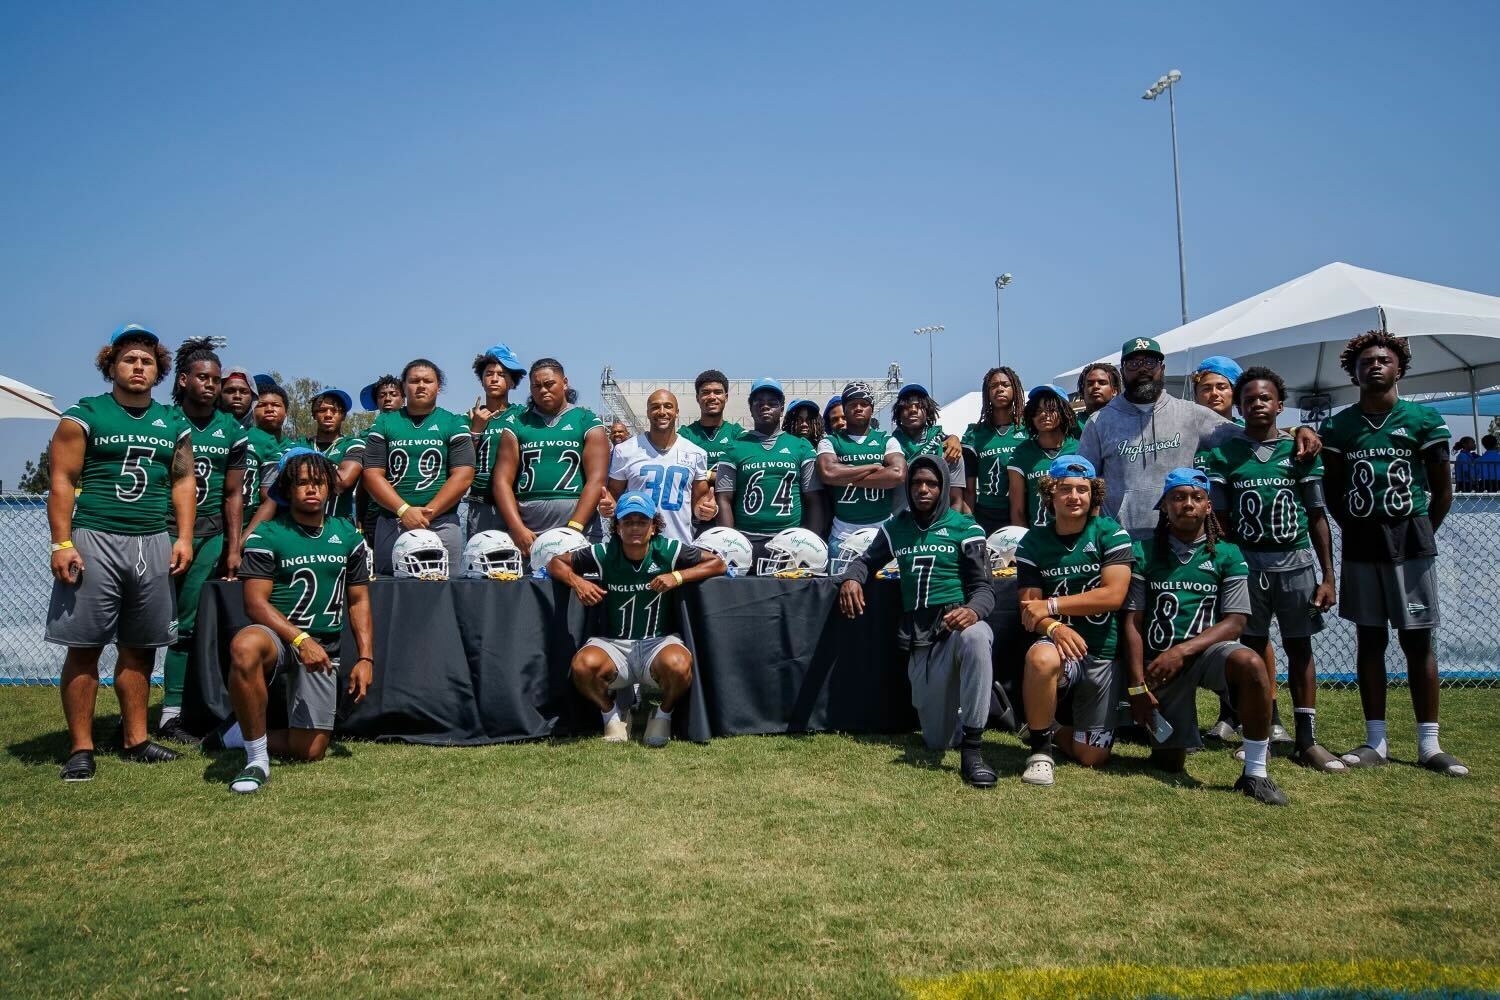 The Inglewood High School football team lined up for a team photo.